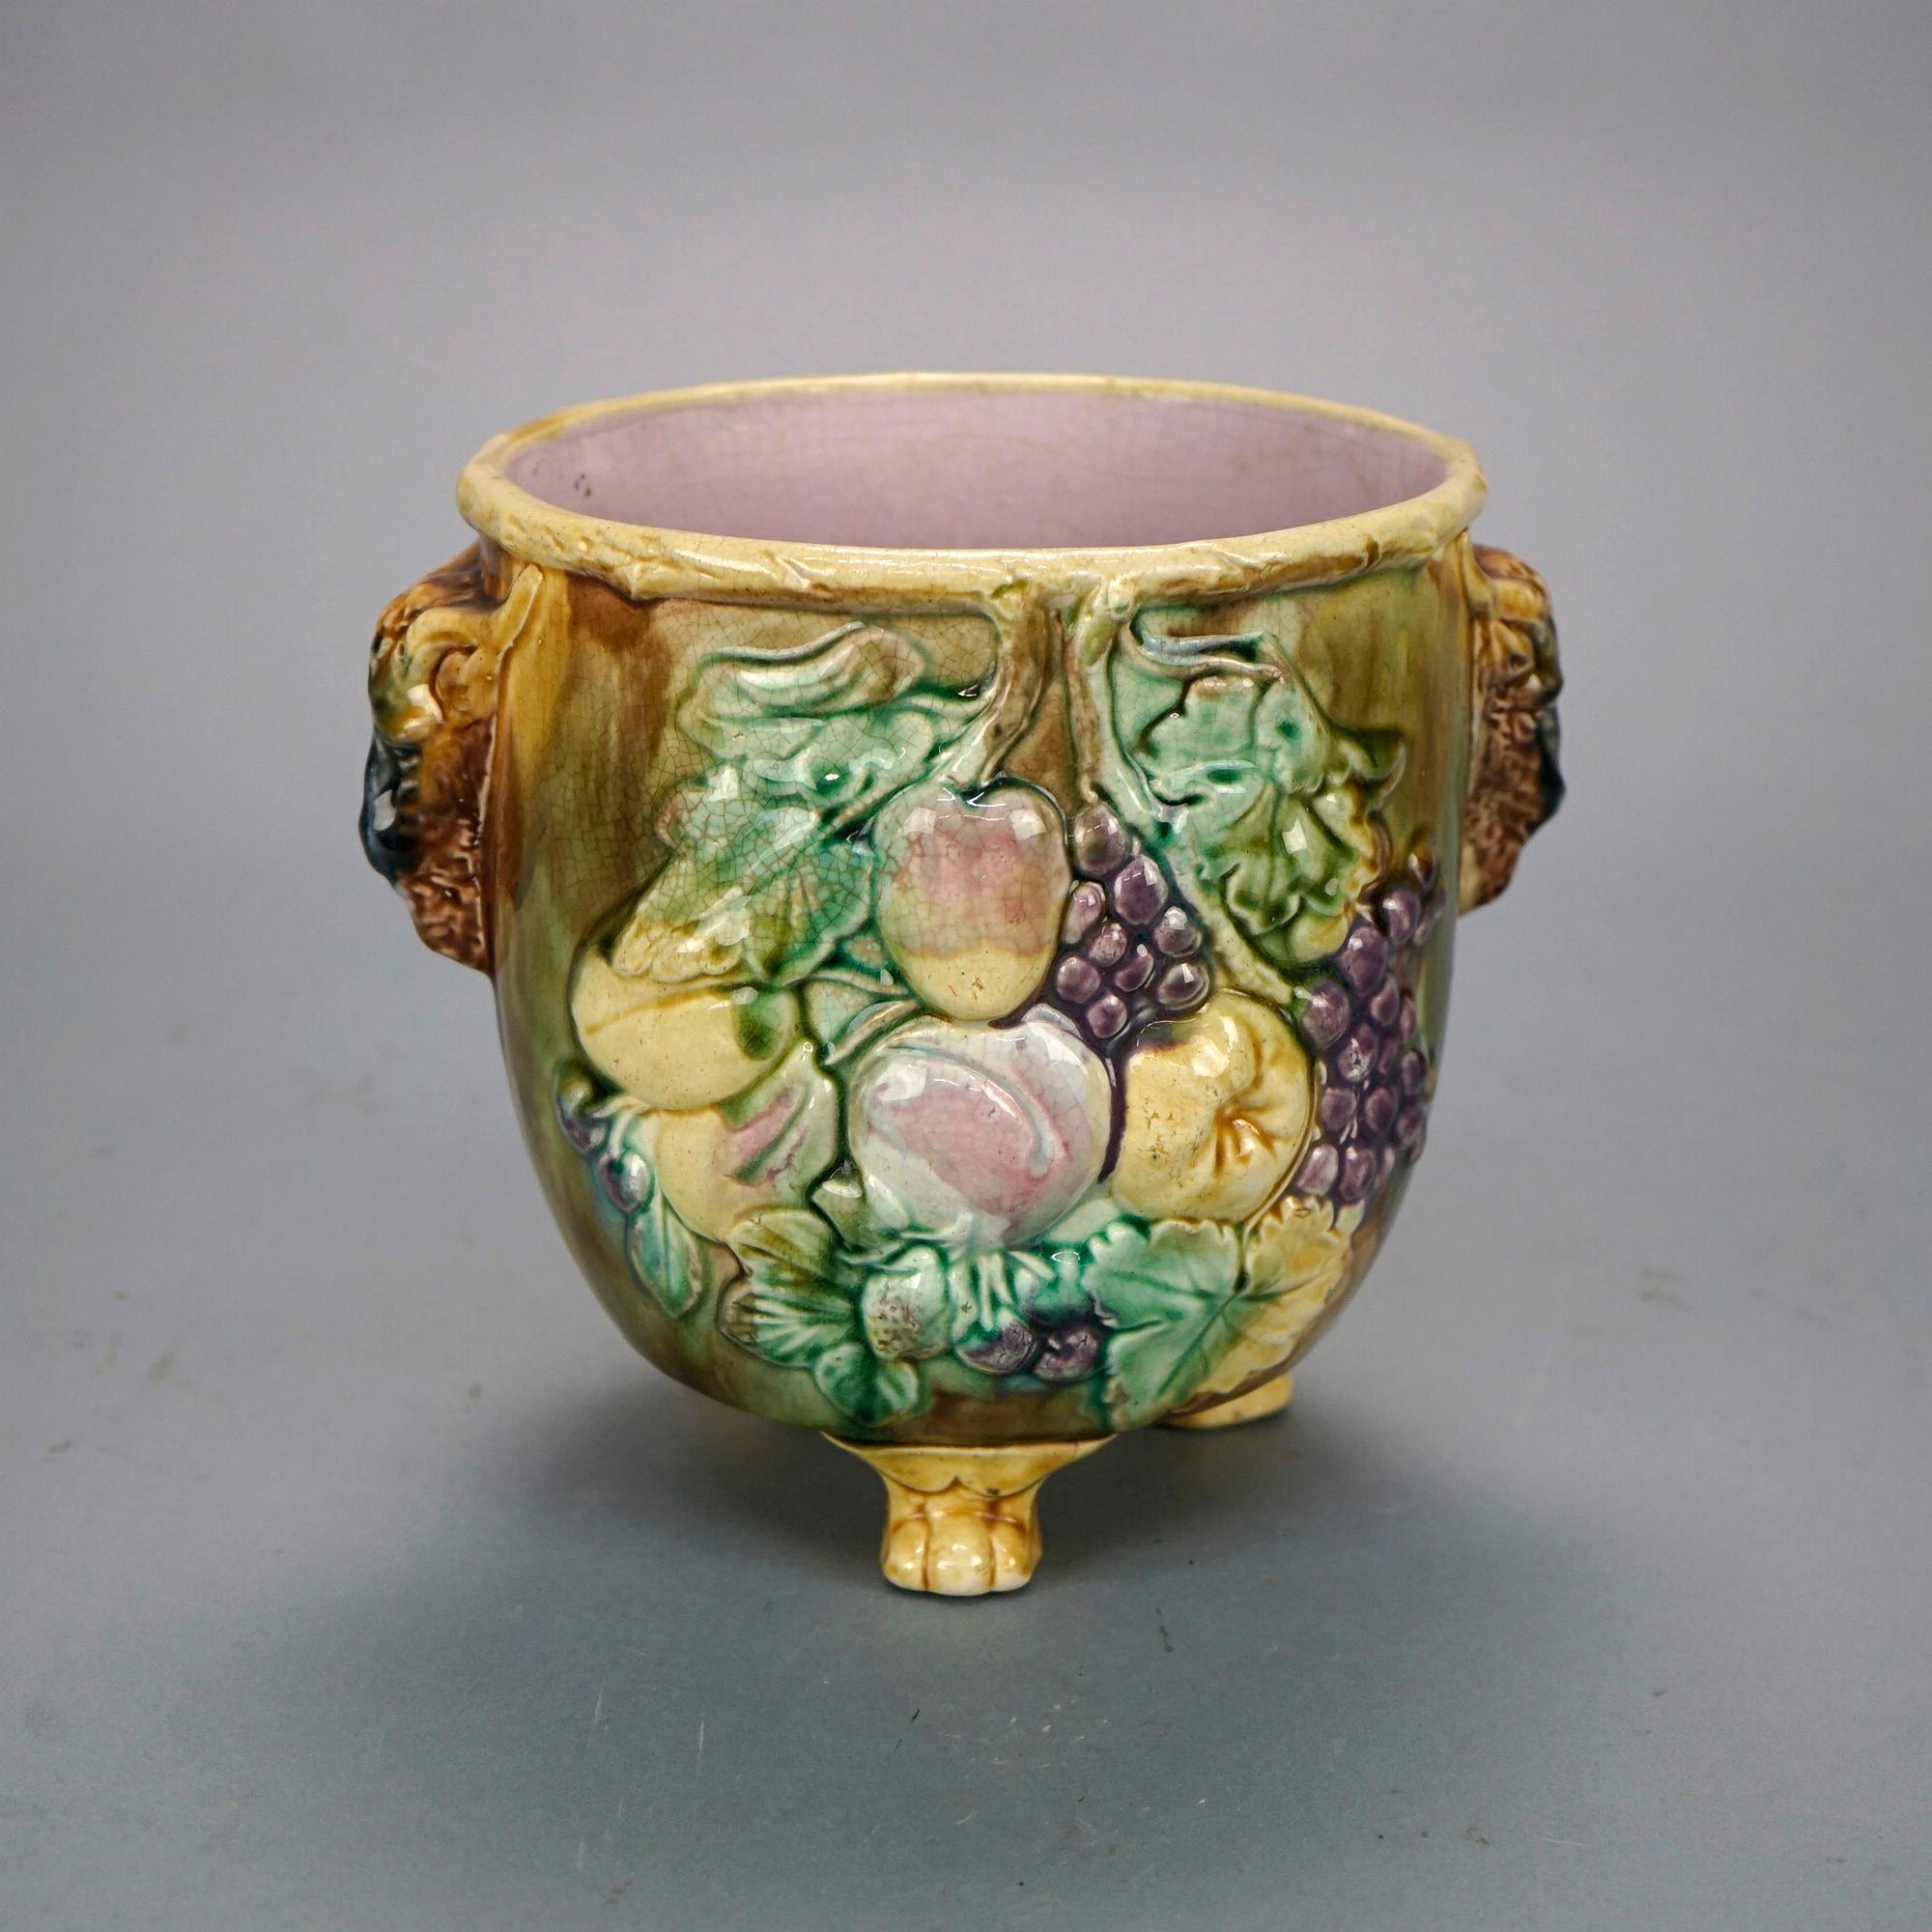 An antique English Majolica jardiniere offers pottery construction with double rams head handles on vessel having fruit and leaf design in relief and raised on foot form legs, 19th century

Measures- 8.25''H x 9.25''W x 8''D